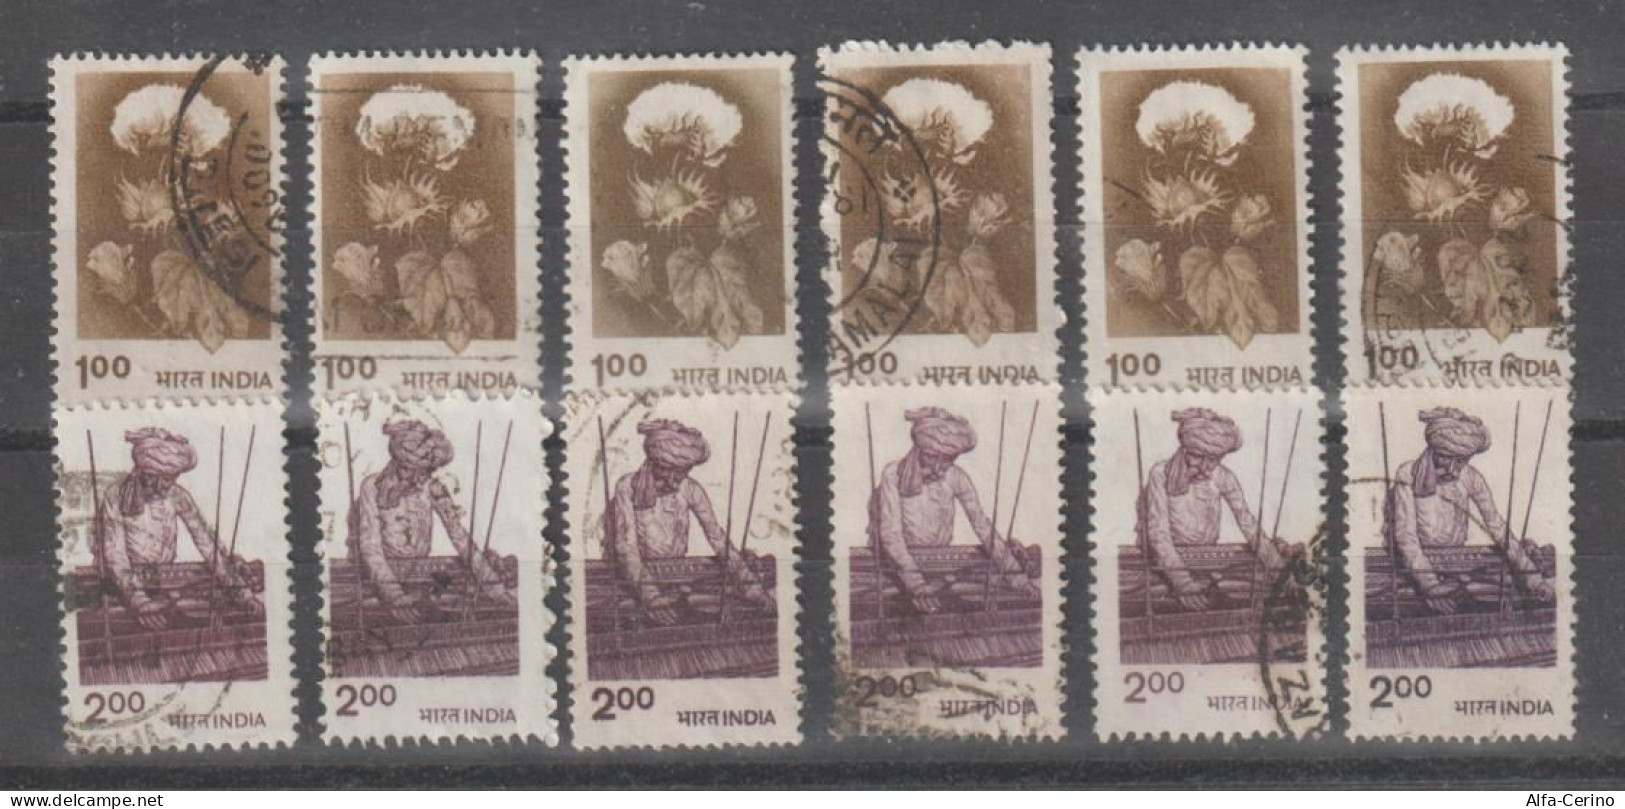 INDIA:  1980  AGRICOLTURA  -  2  VAL. US. -  RIPETUTI  6  VOLTE  -  YV/TELL. 629/30 - Used Stamps